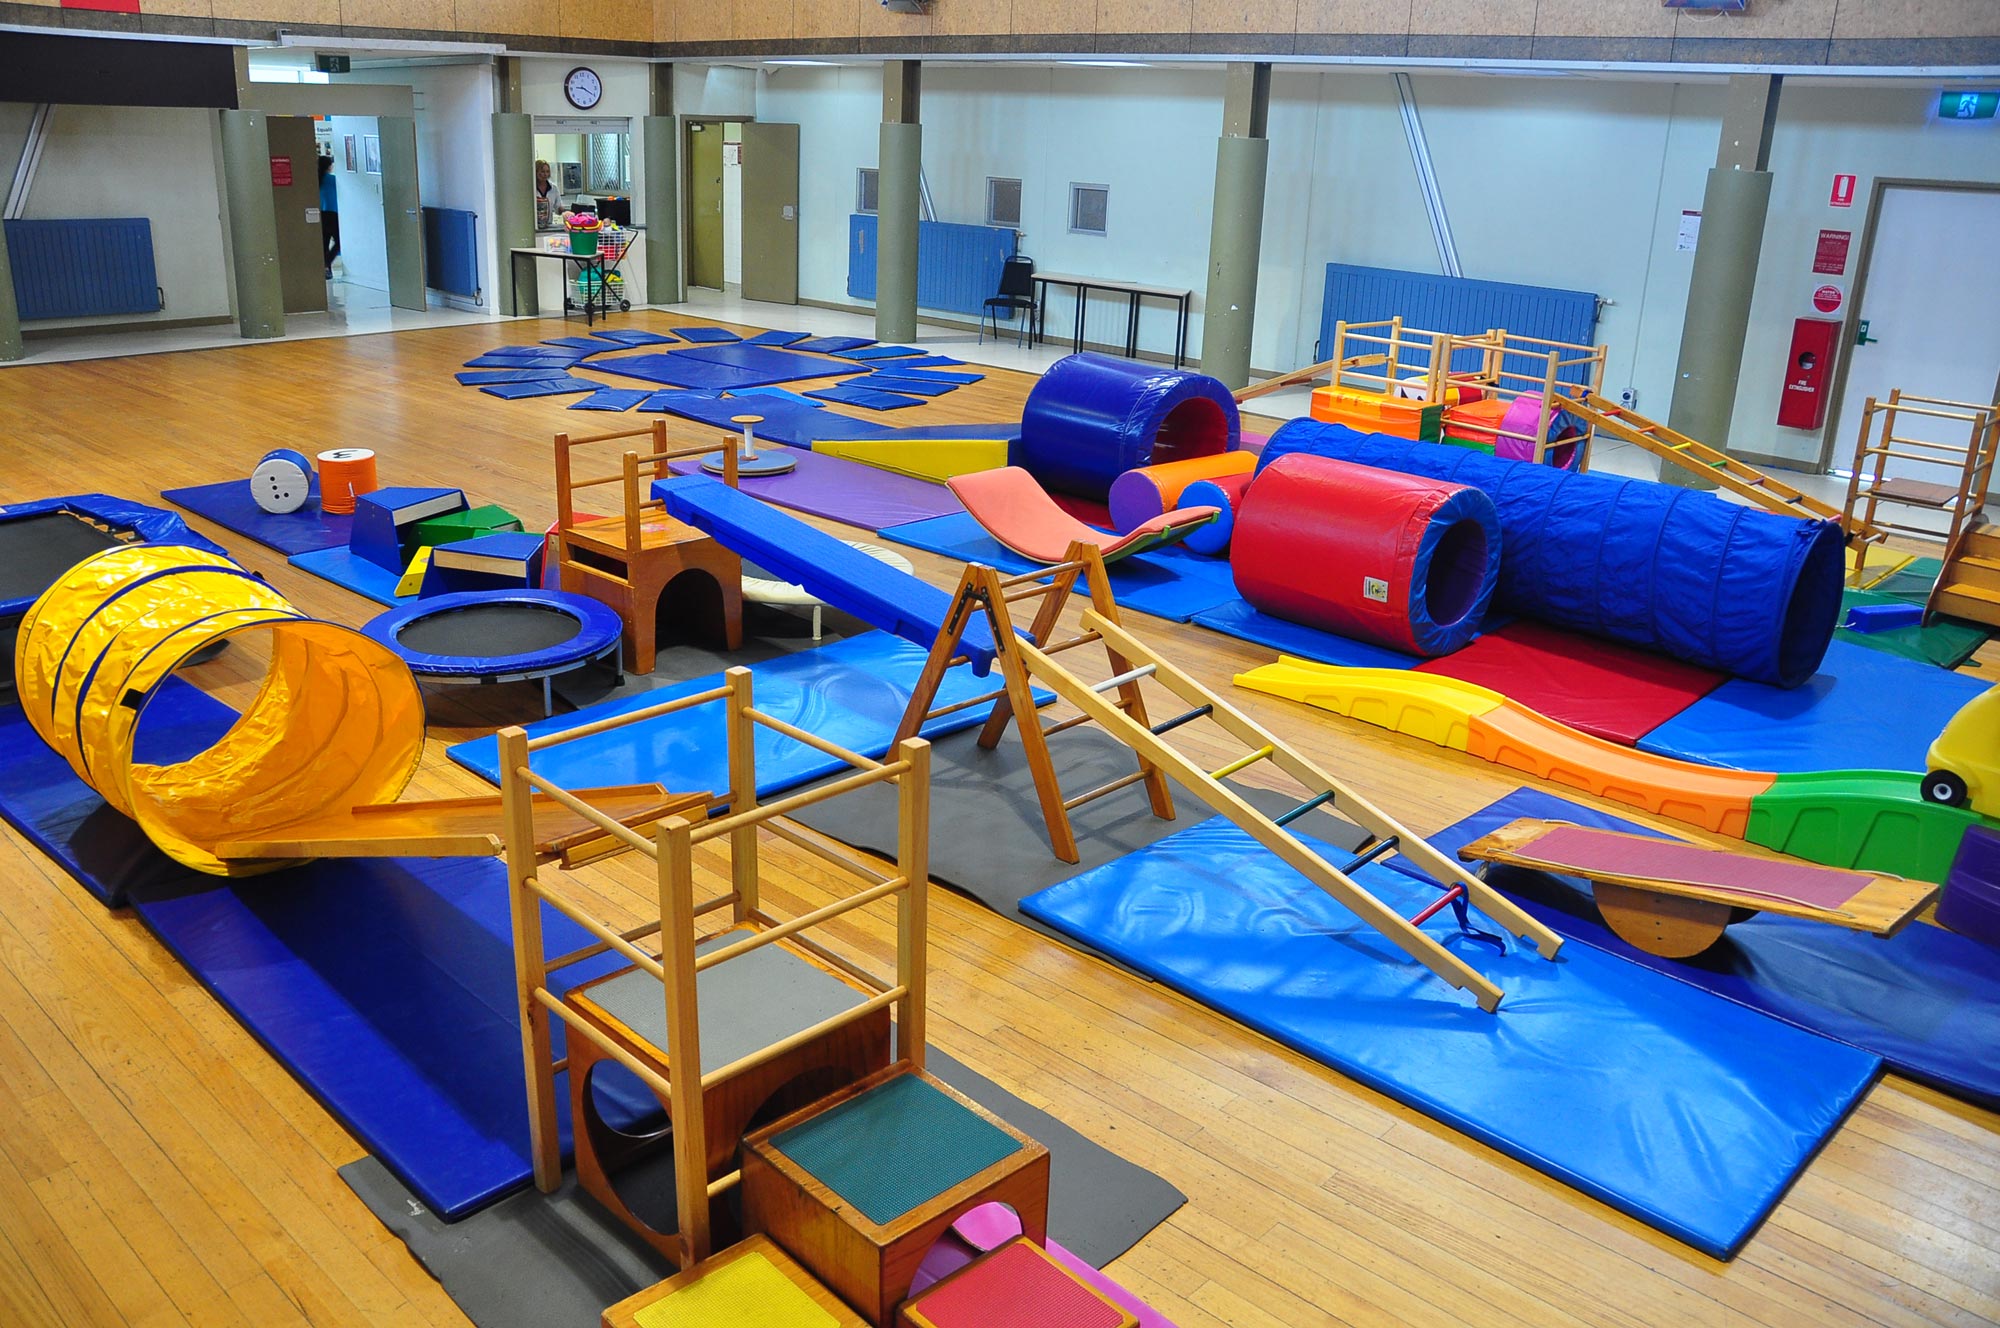 Colourful children's play equipment set up in a hall